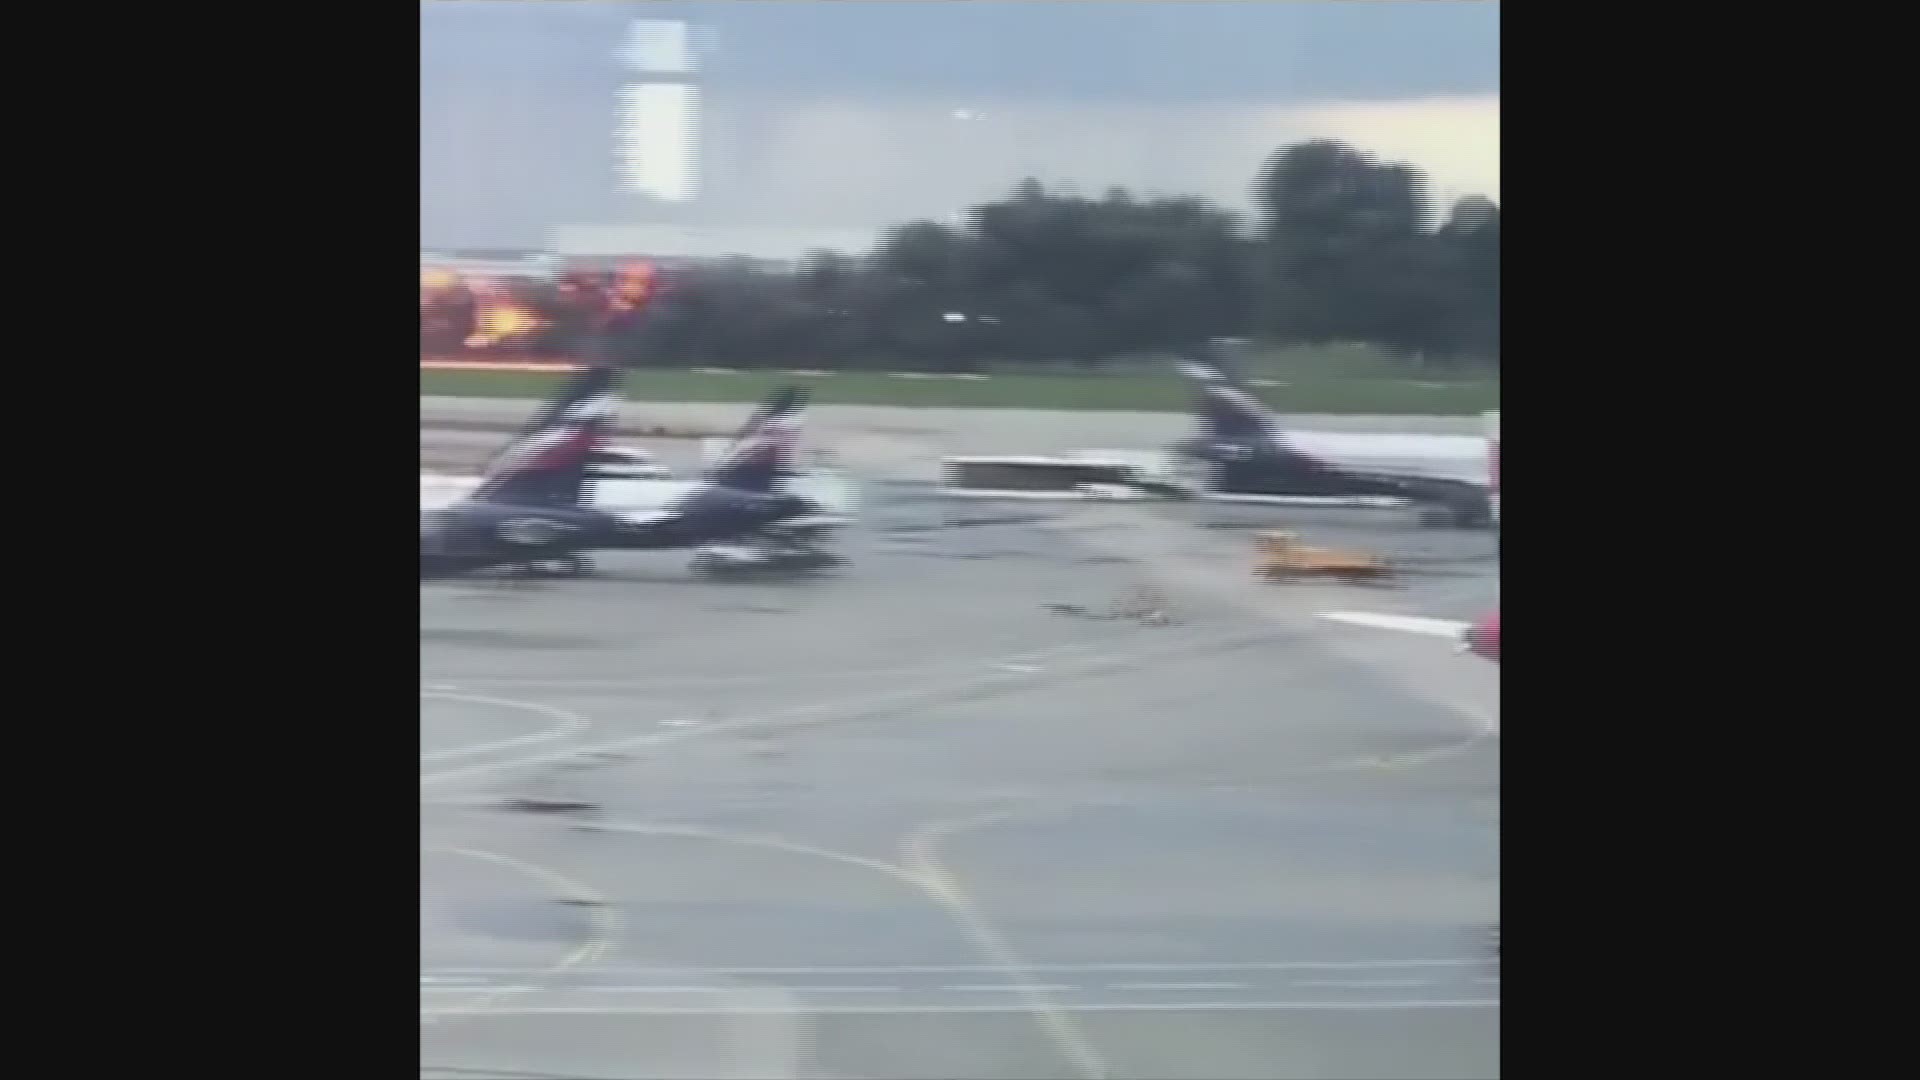 Russian officials say one person died and at least four were injured after a plane belonging to flagship carrier Aeroflot made an emergency landing in Moscow with flames and smoke billowing from its rear section. (AP)